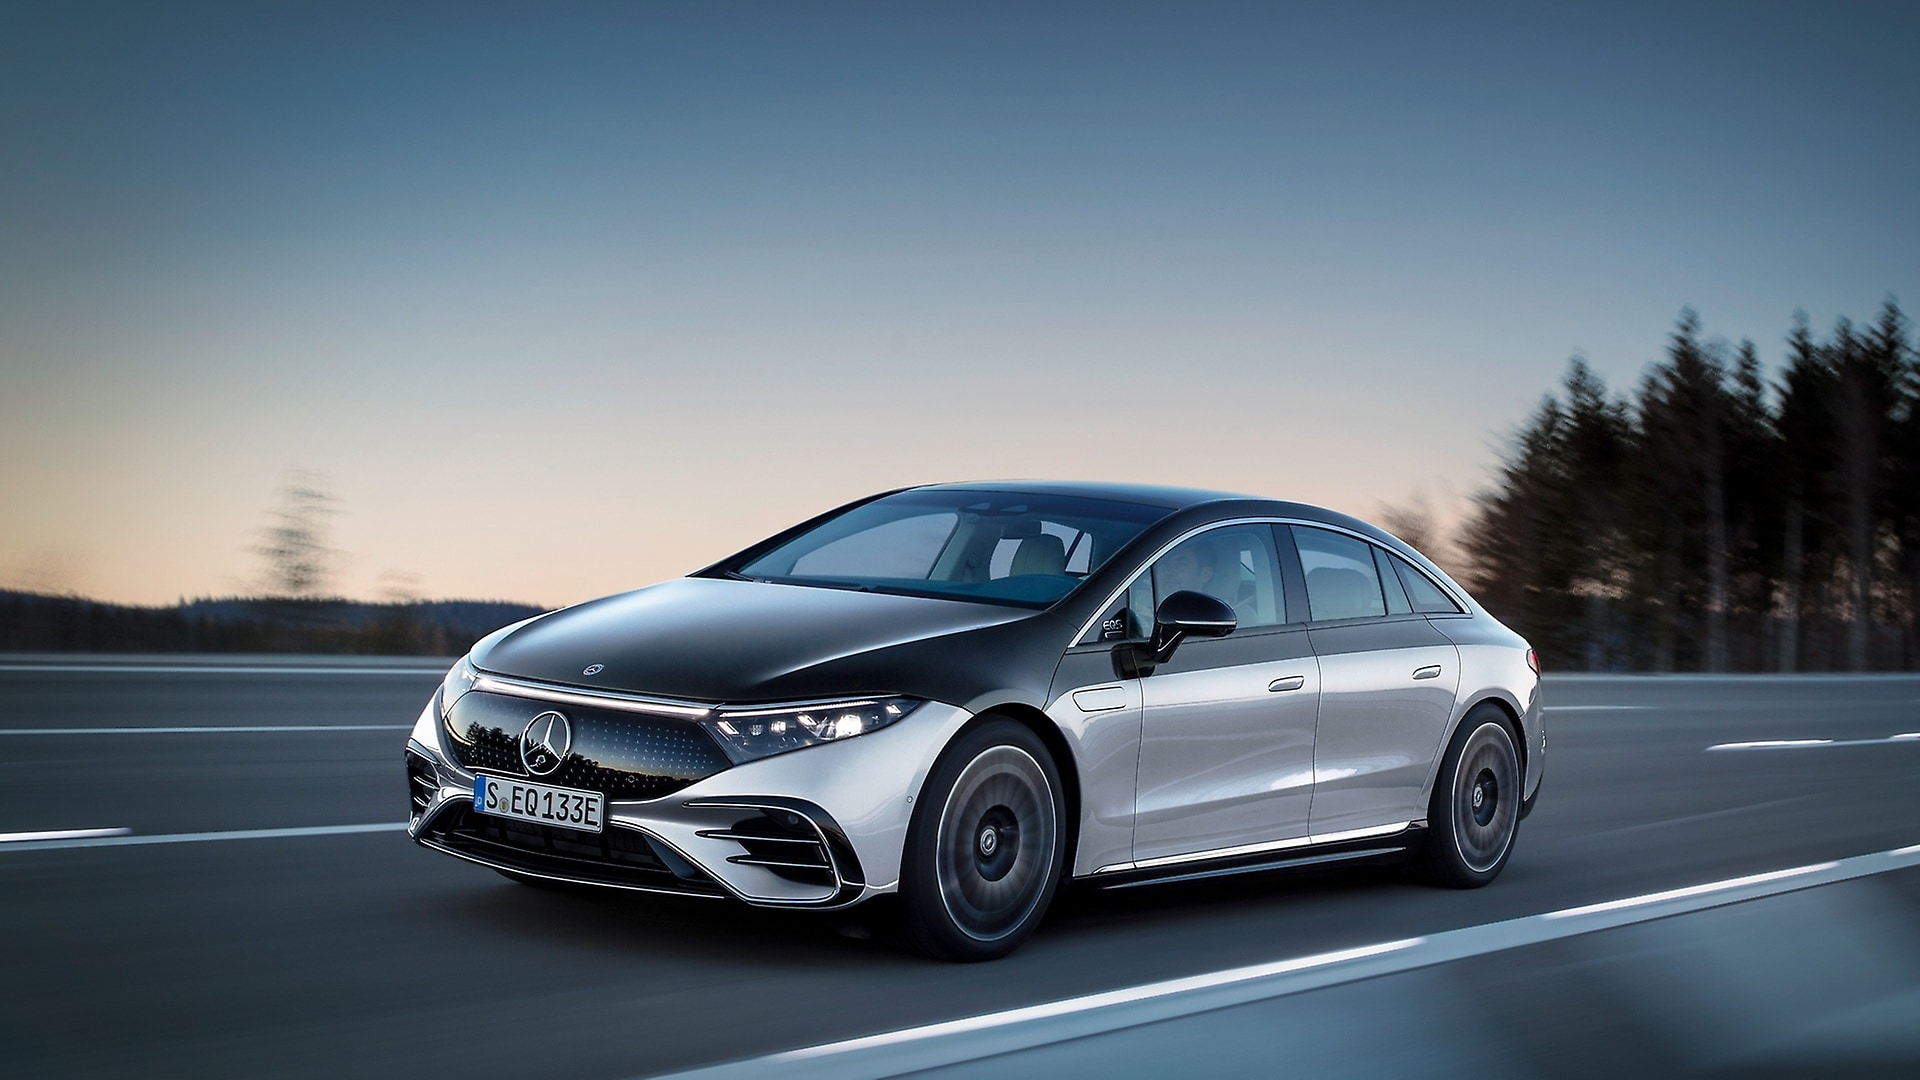 The EQS is the first all-electric luxury saloon from Mercedes-Benz. With it, Mercedes-Benz is redefining this vehicle segment.